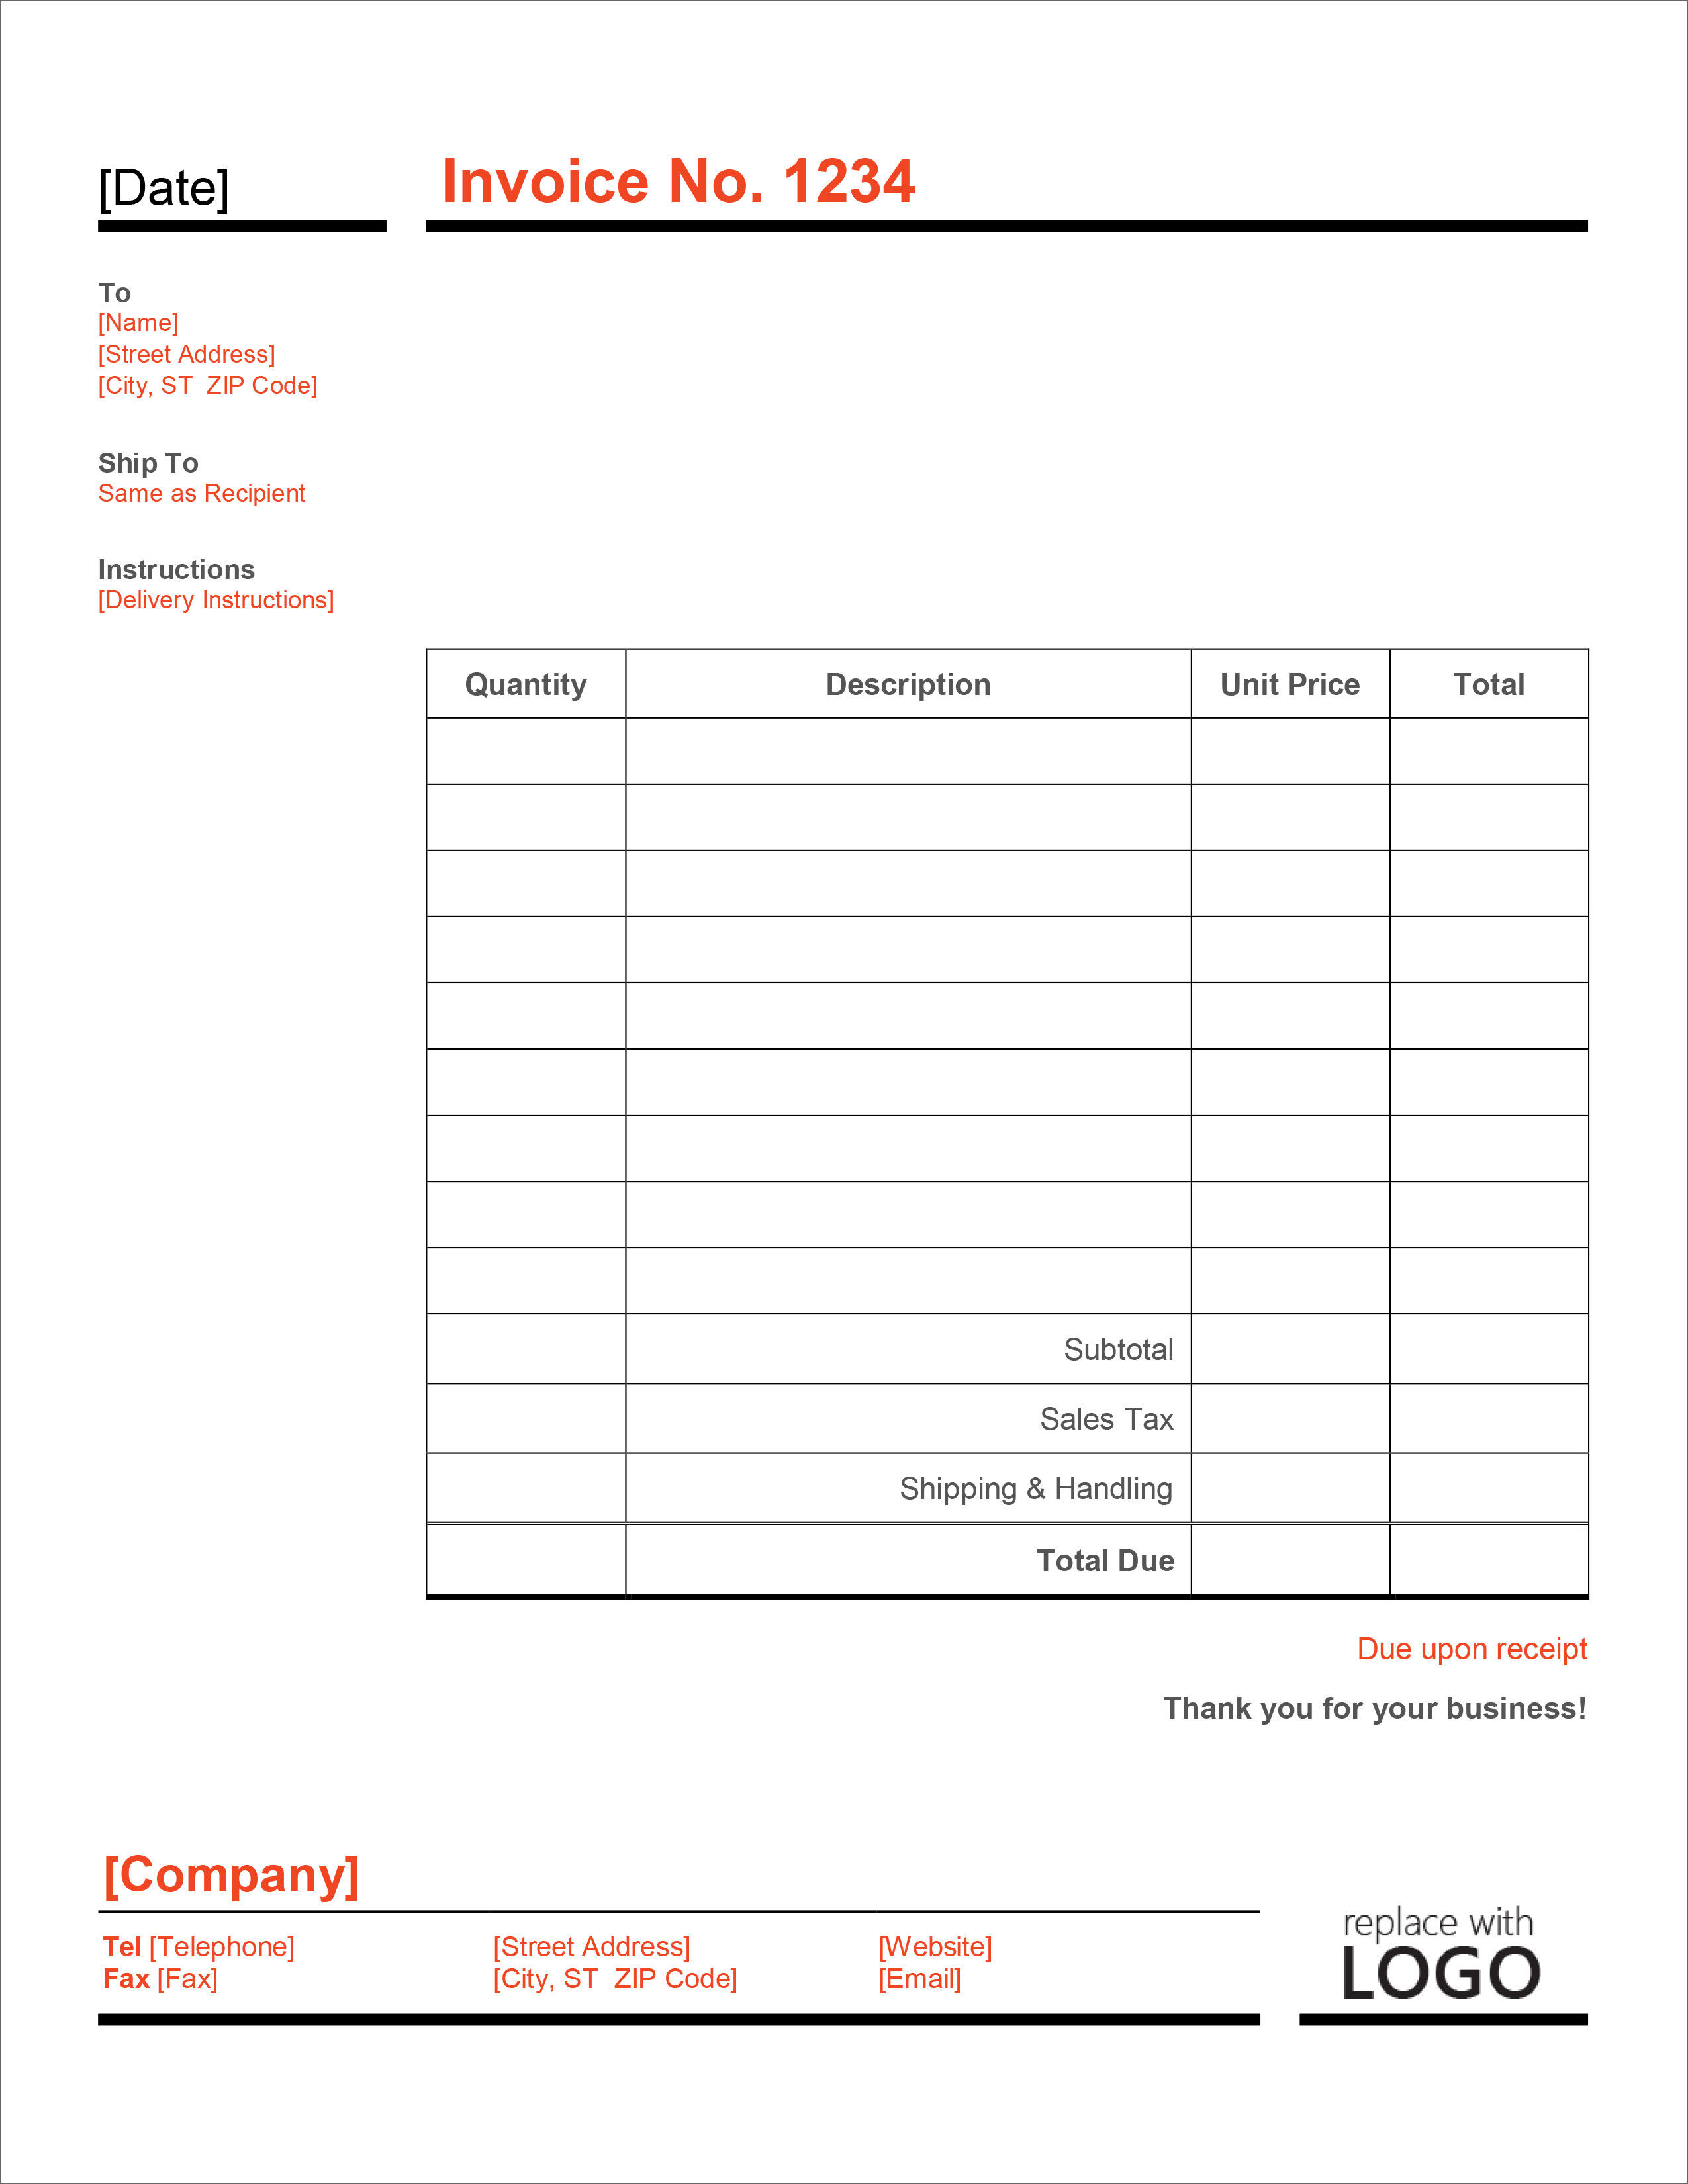 22 Free Invoice Templates In Microsoft Excel And DOCX Formats Intended For Microsoft Office Word Invoice Template